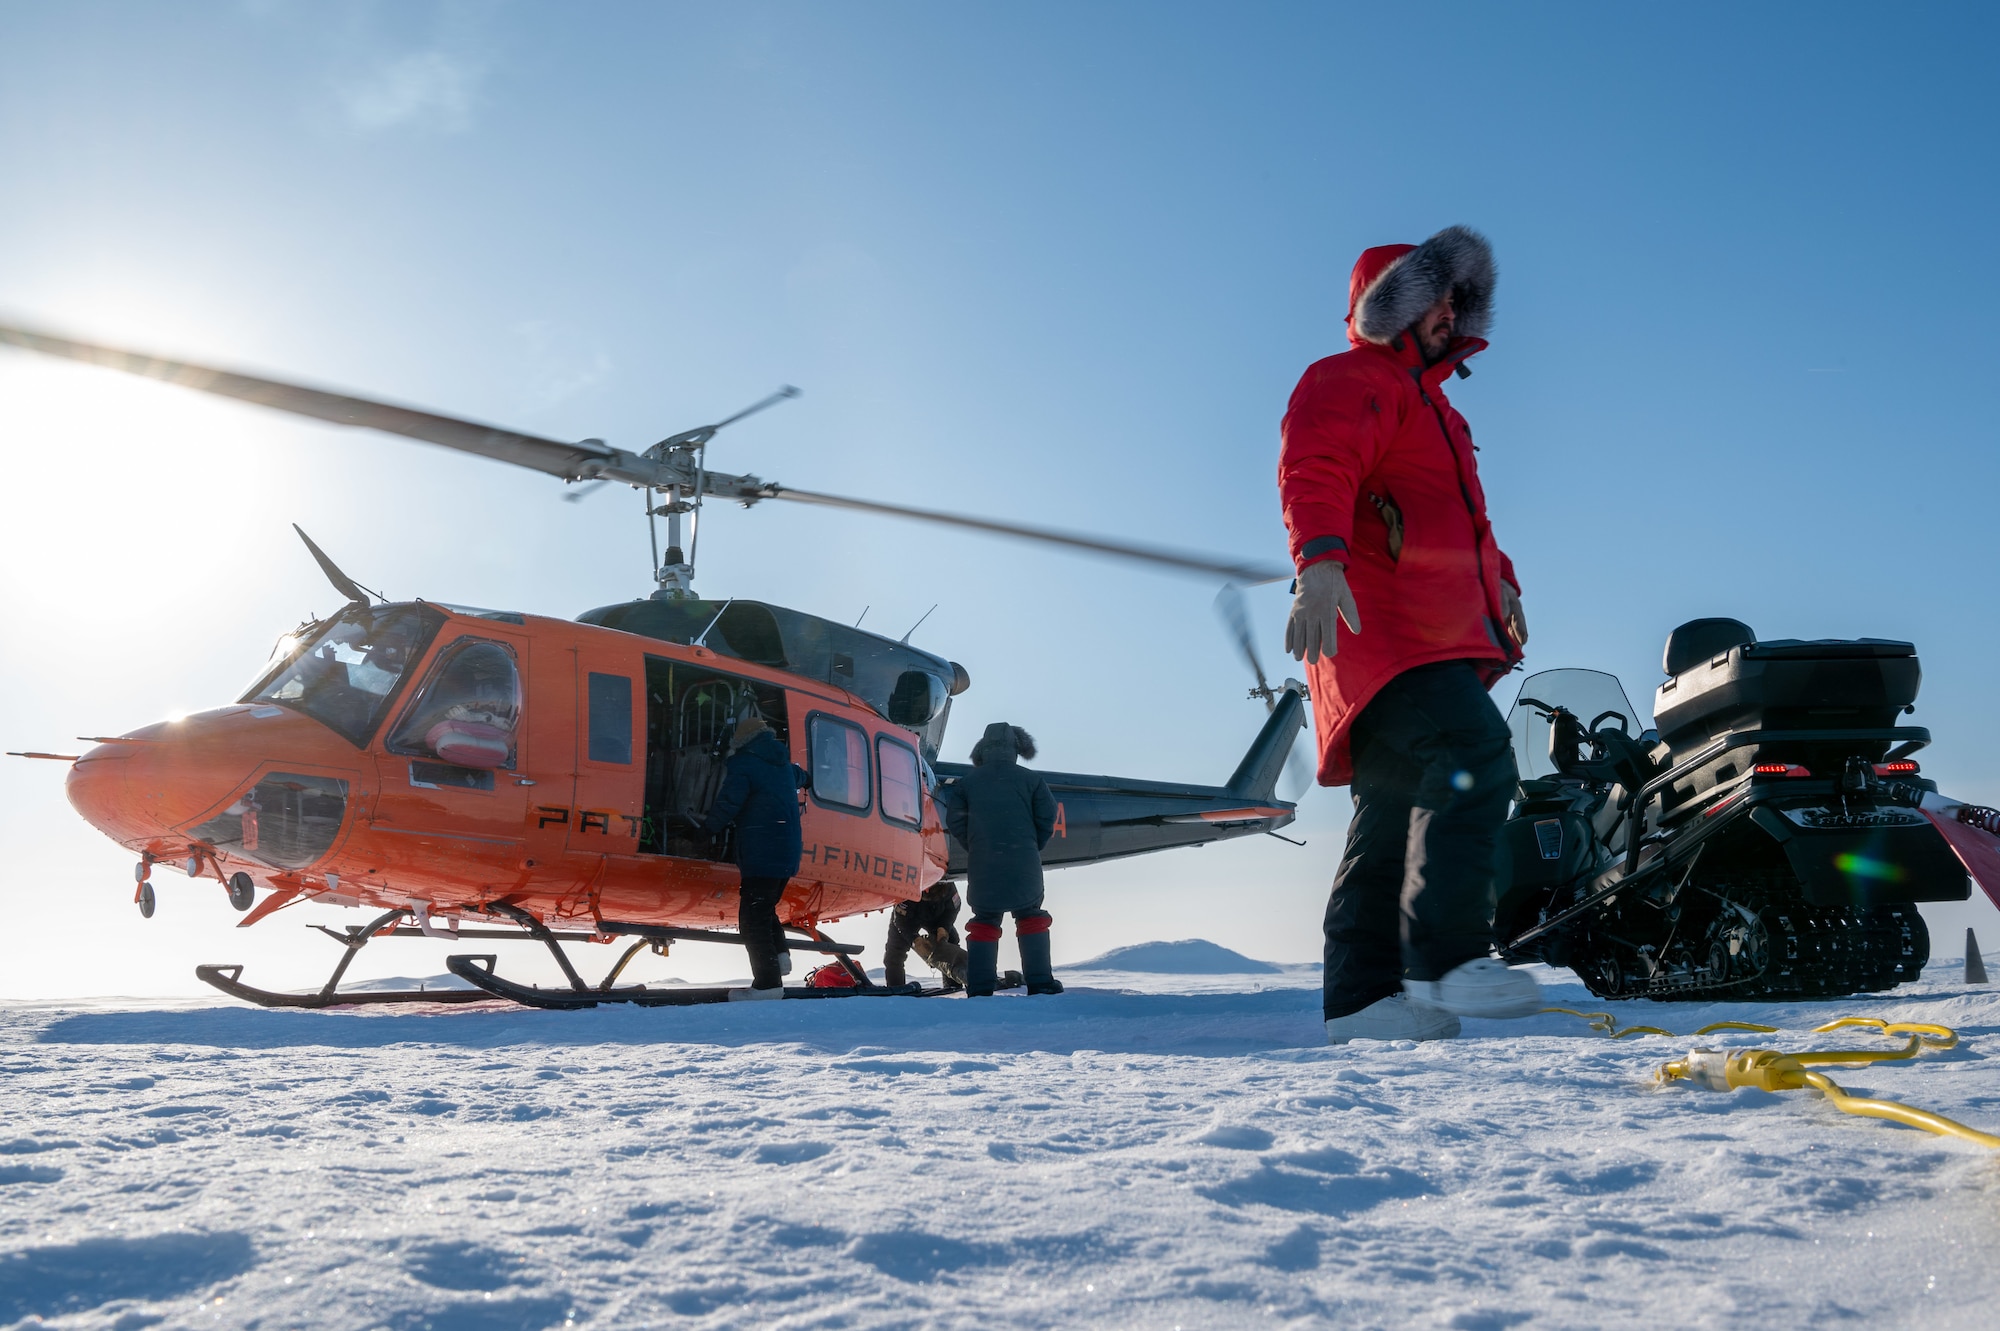 Personnel load equipment on helicopter during Operation Ice Camp.